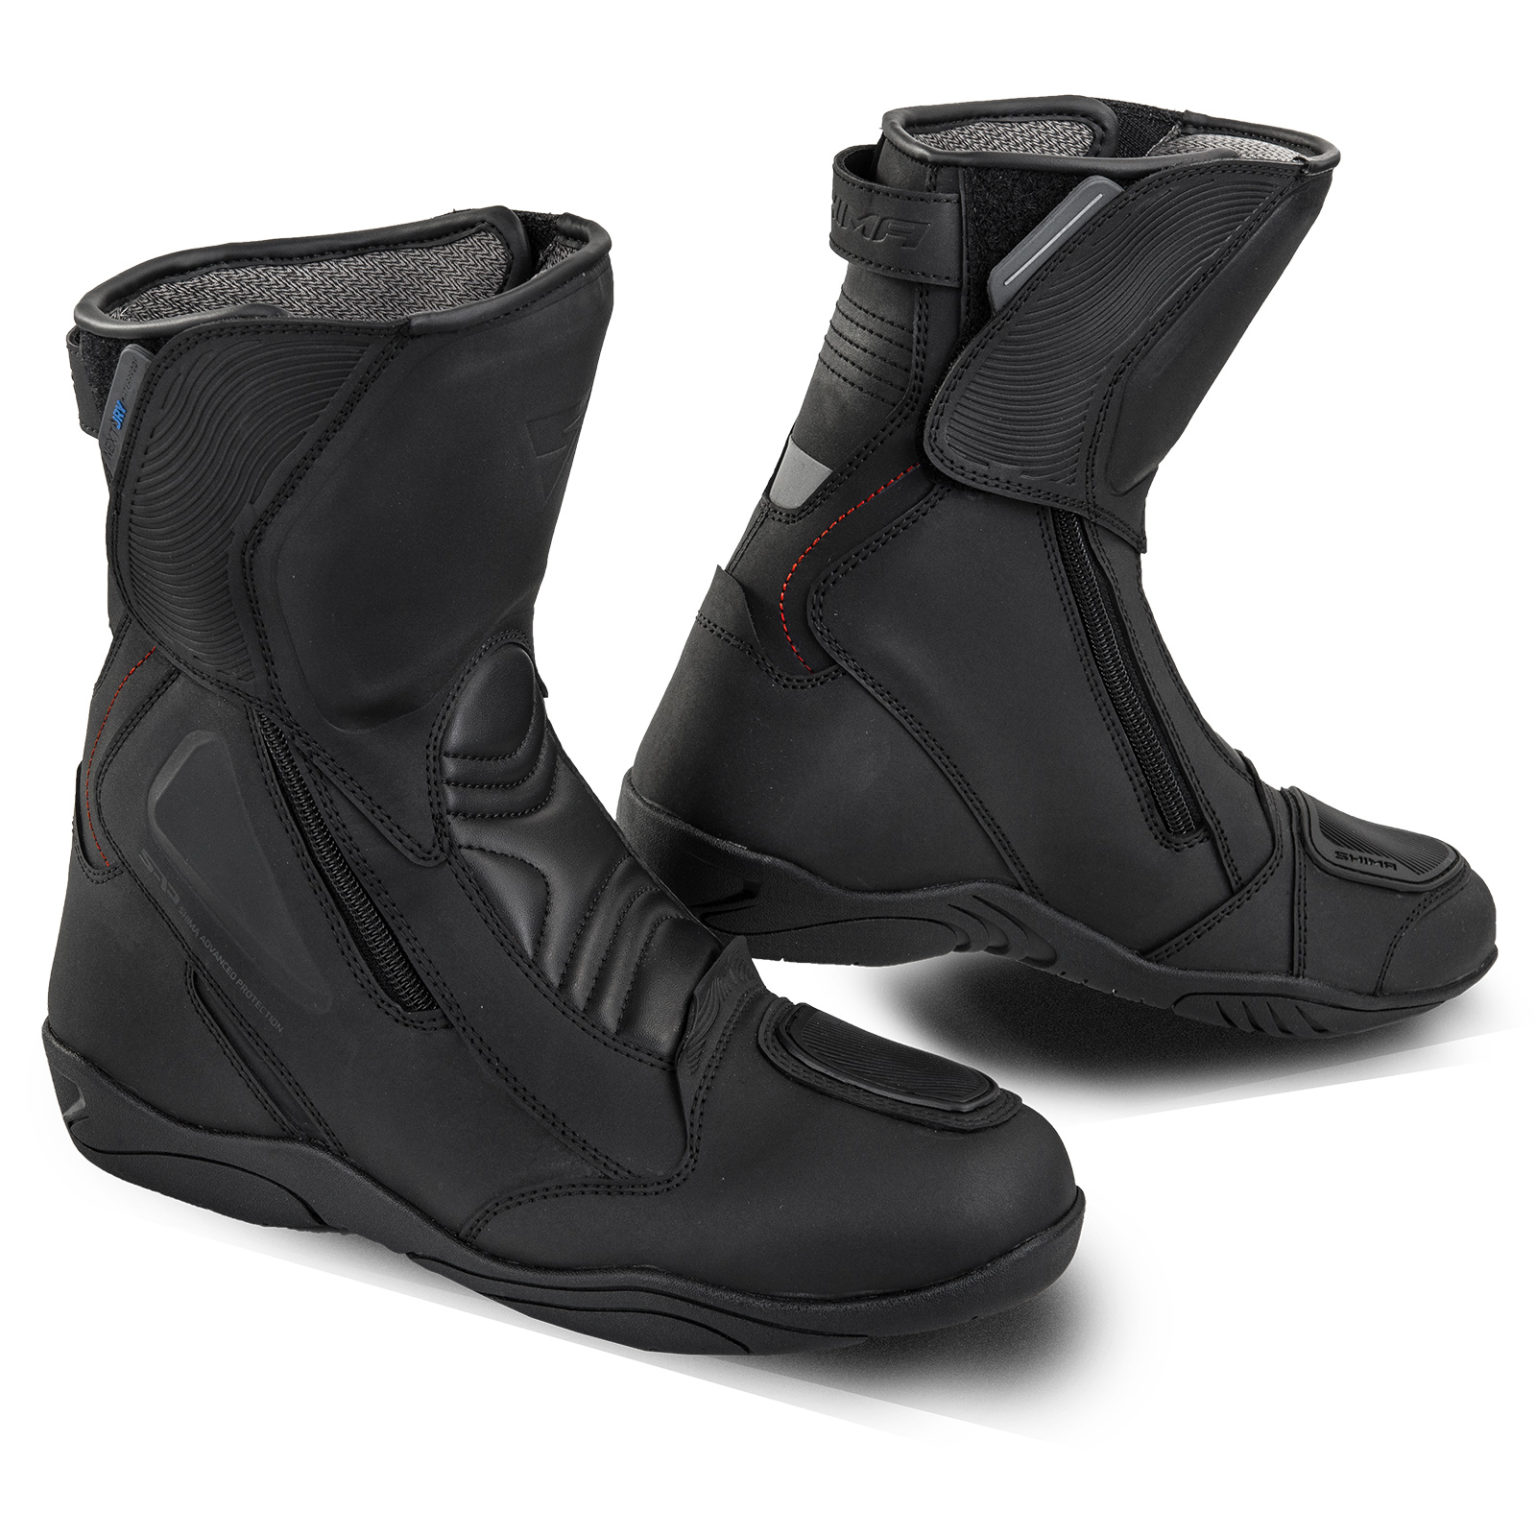 Shima Terra Adventure Black Riding Boots | Buy online in India